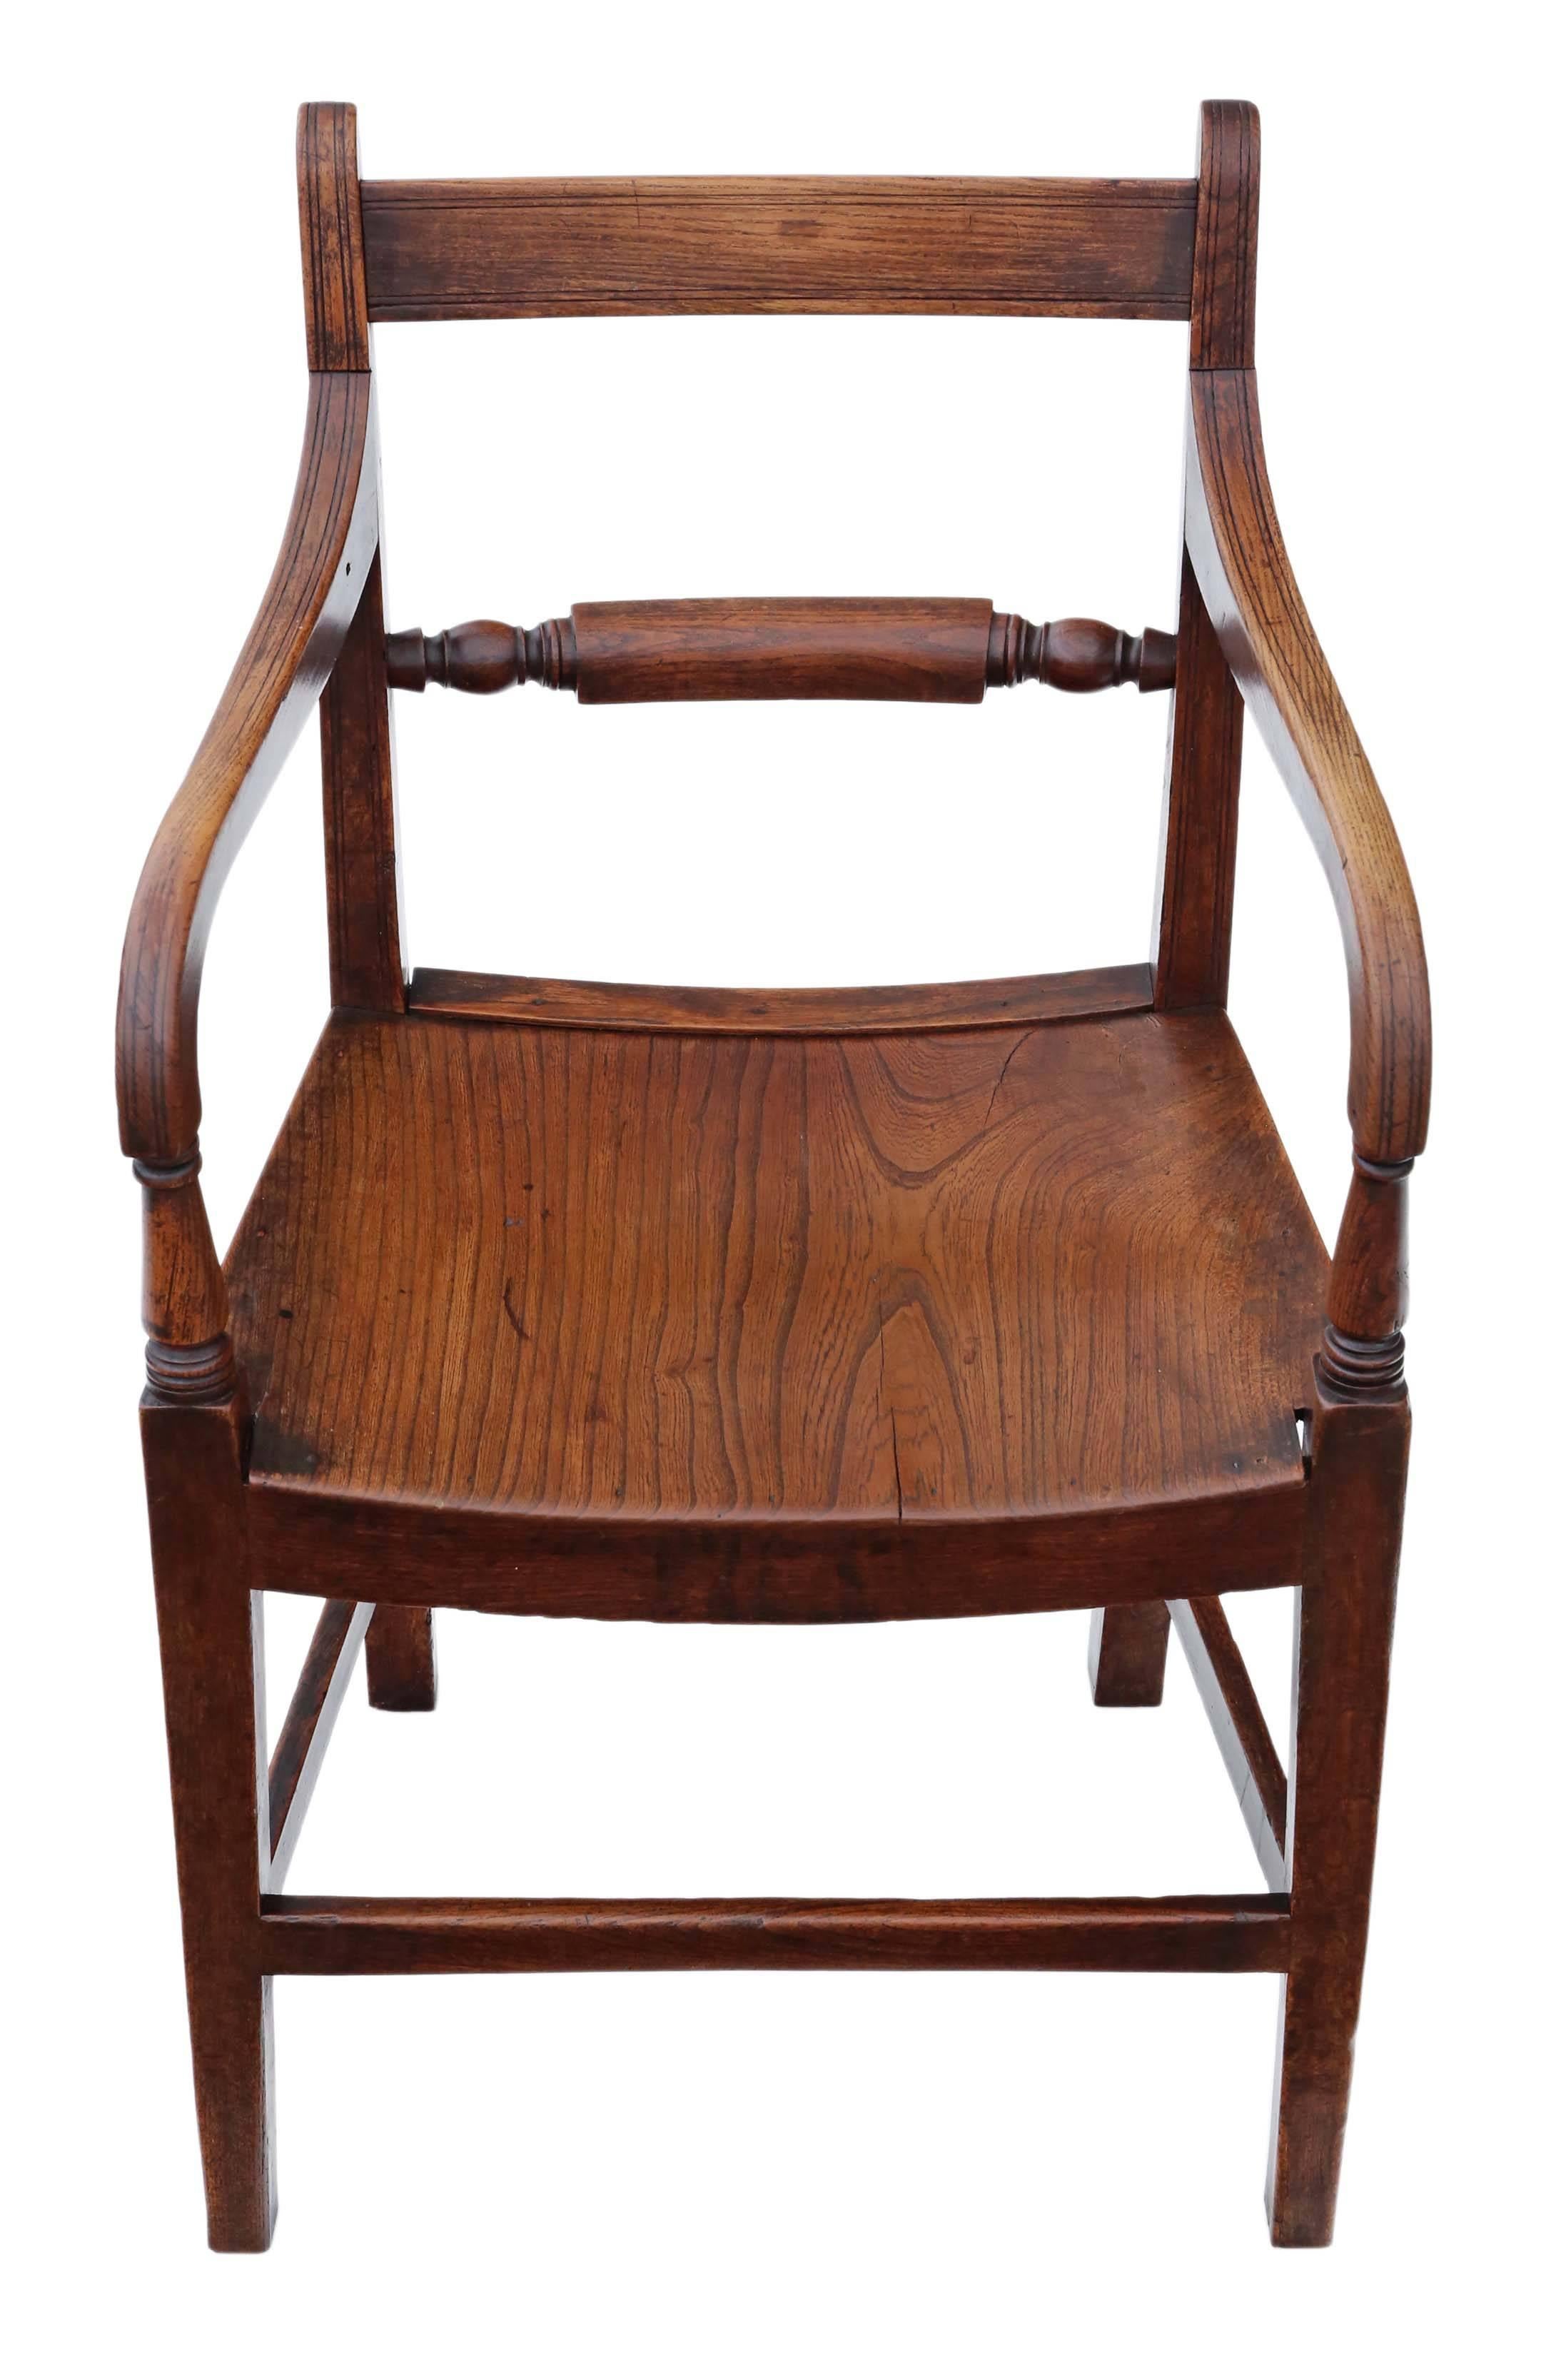 Antique quality Georgian circa 1800 elm elbow desk chair. Could also be used as a side, hall or carver chair.

Solid and strong, with no loose joints. Full of age, character and charm. A simple attractive chair with the best age and